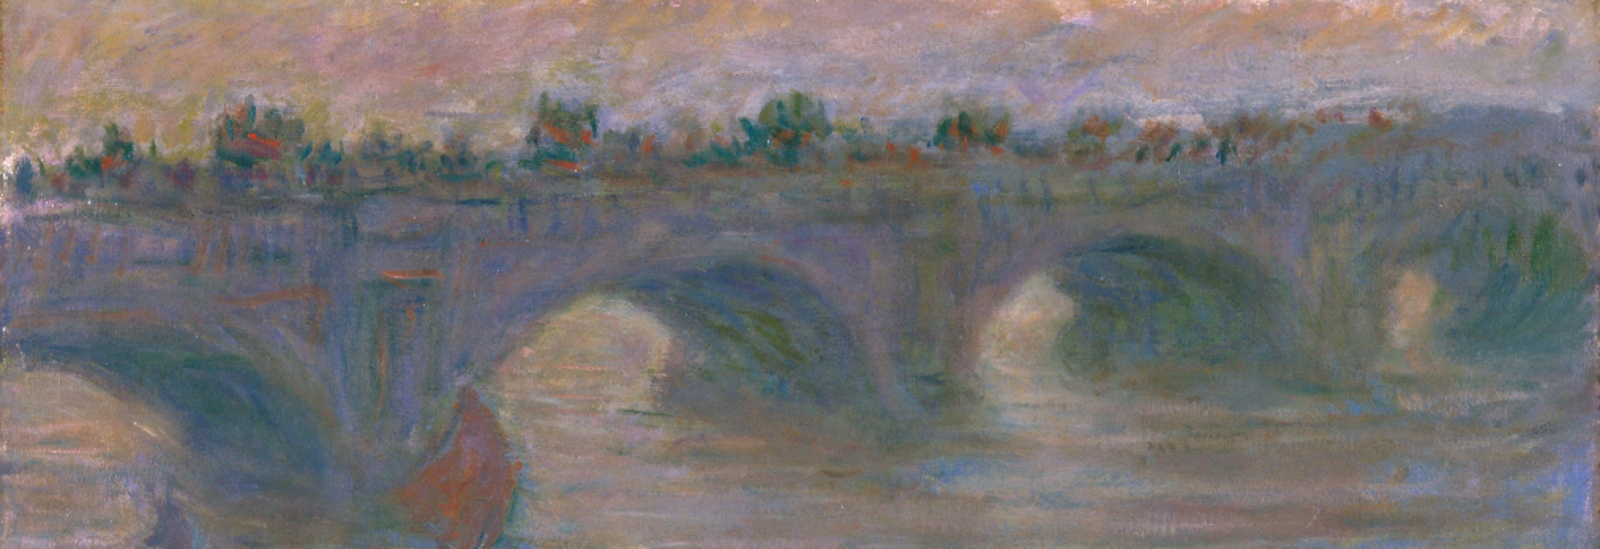 impressionist painting of waterloo bridge in pinks, yellows, browns and greens, image depicts a body of water with bridge in the background. Bridge is made of stone and composed of a series of arches